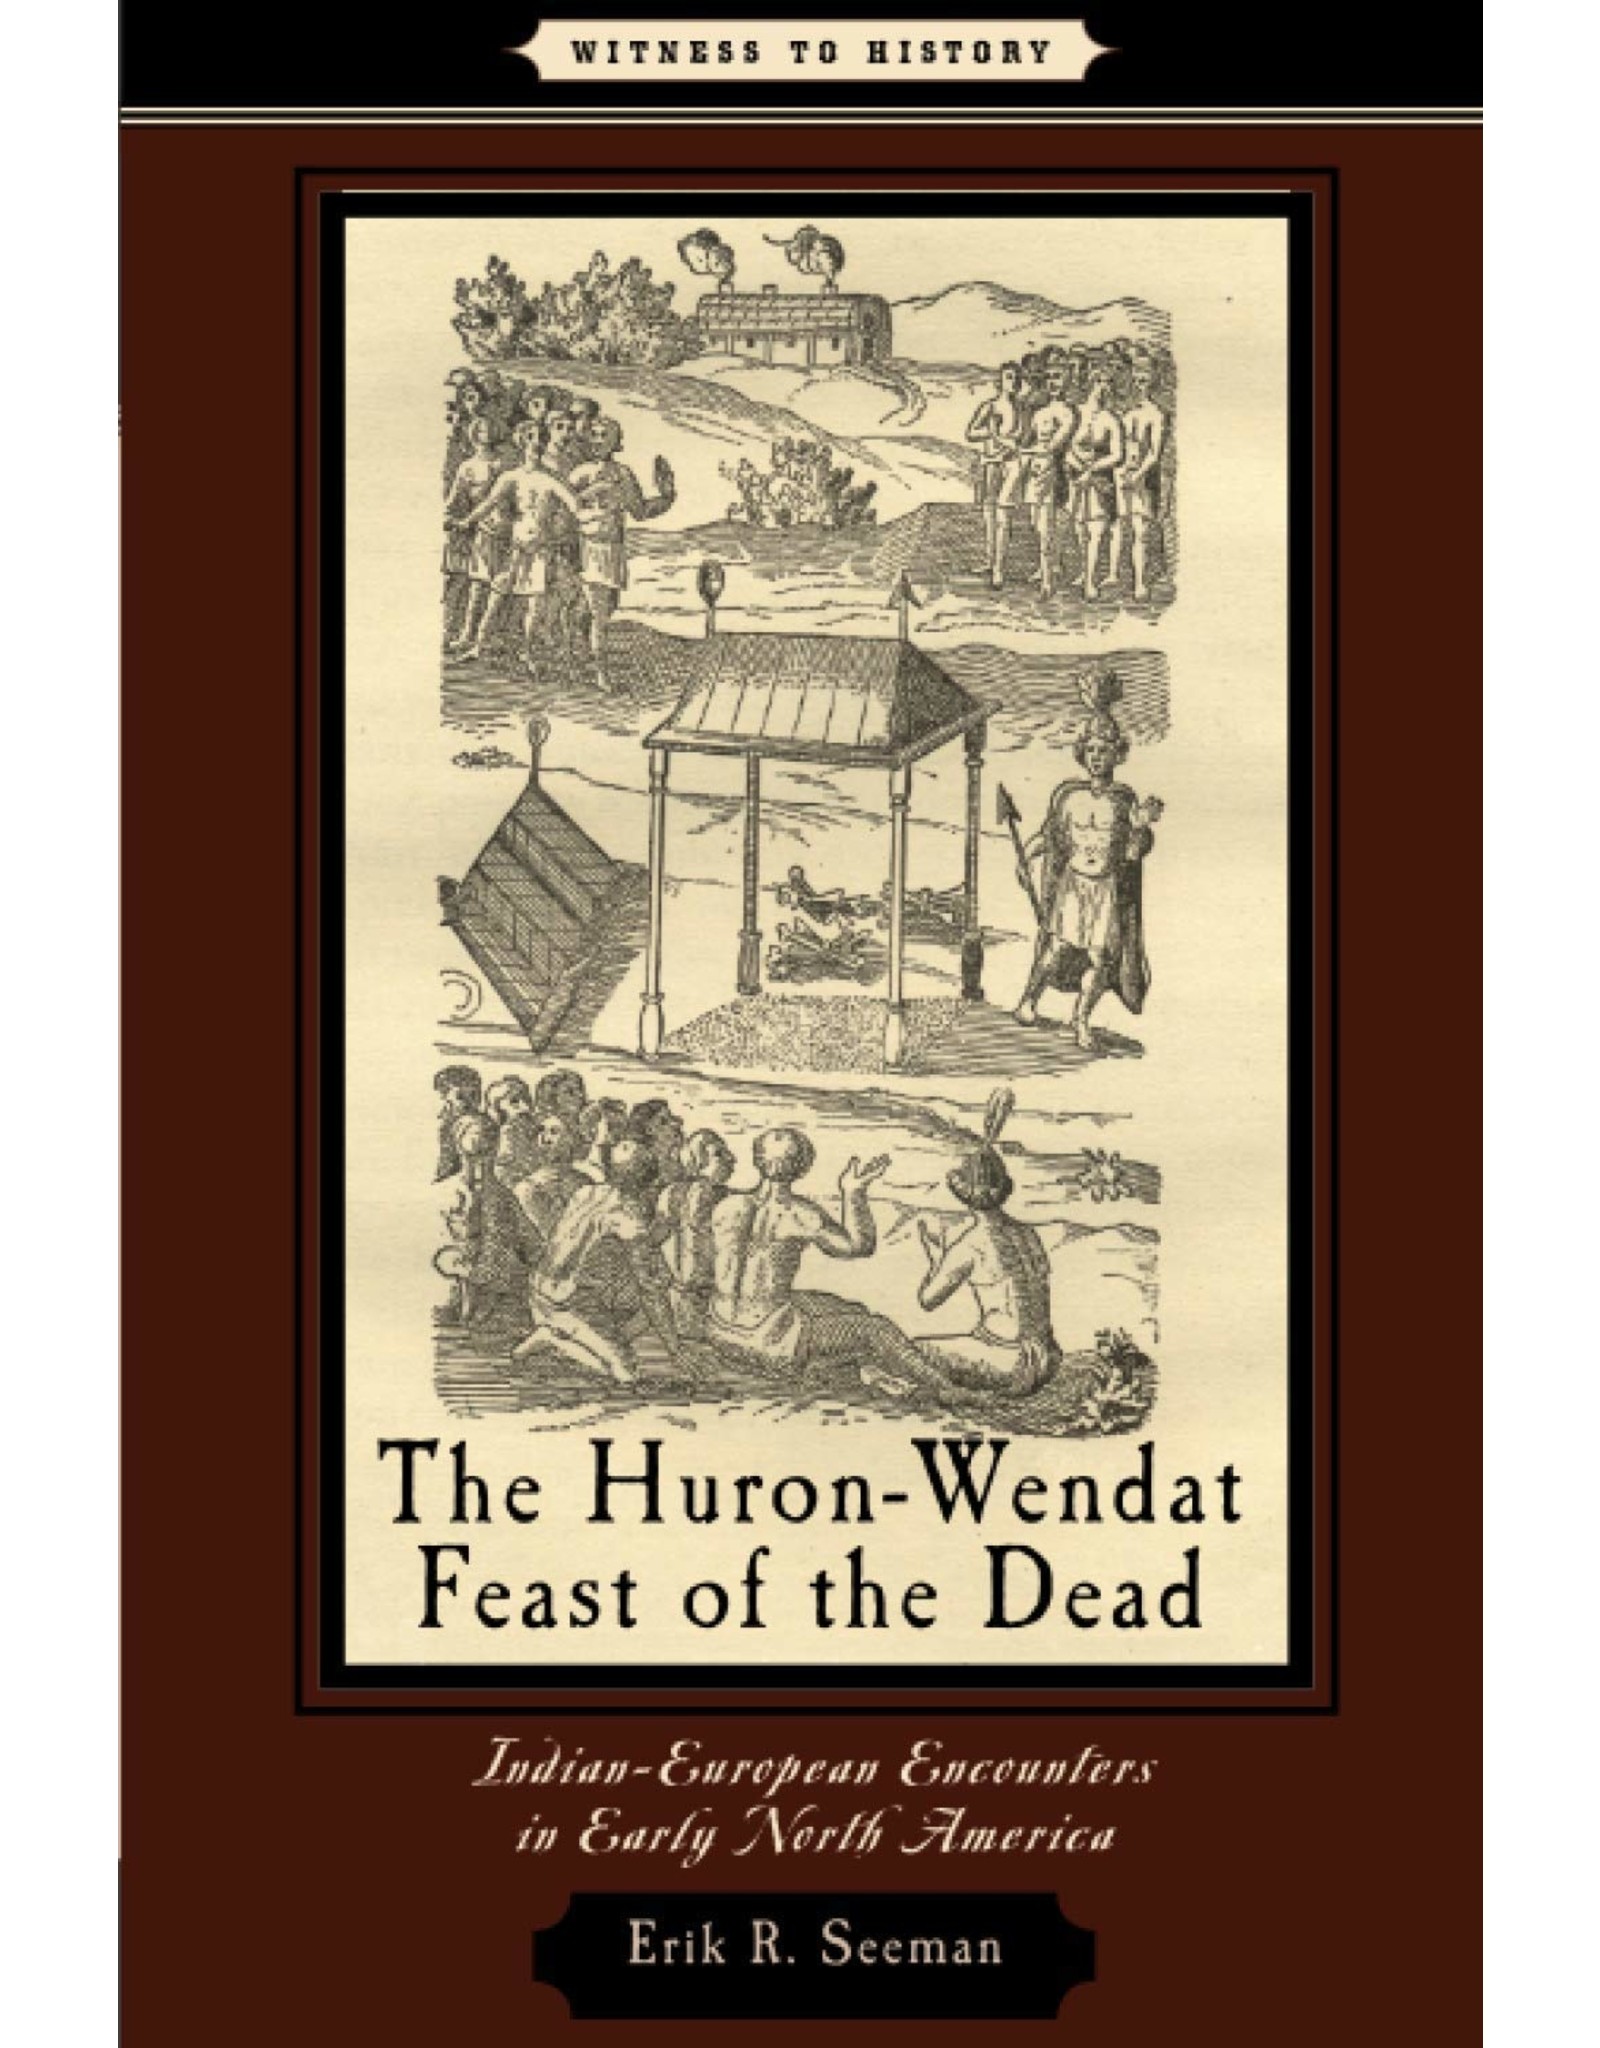 Textbook The Huron-Wendat Feast of the Dead: Indian-European Encounters in Early North America